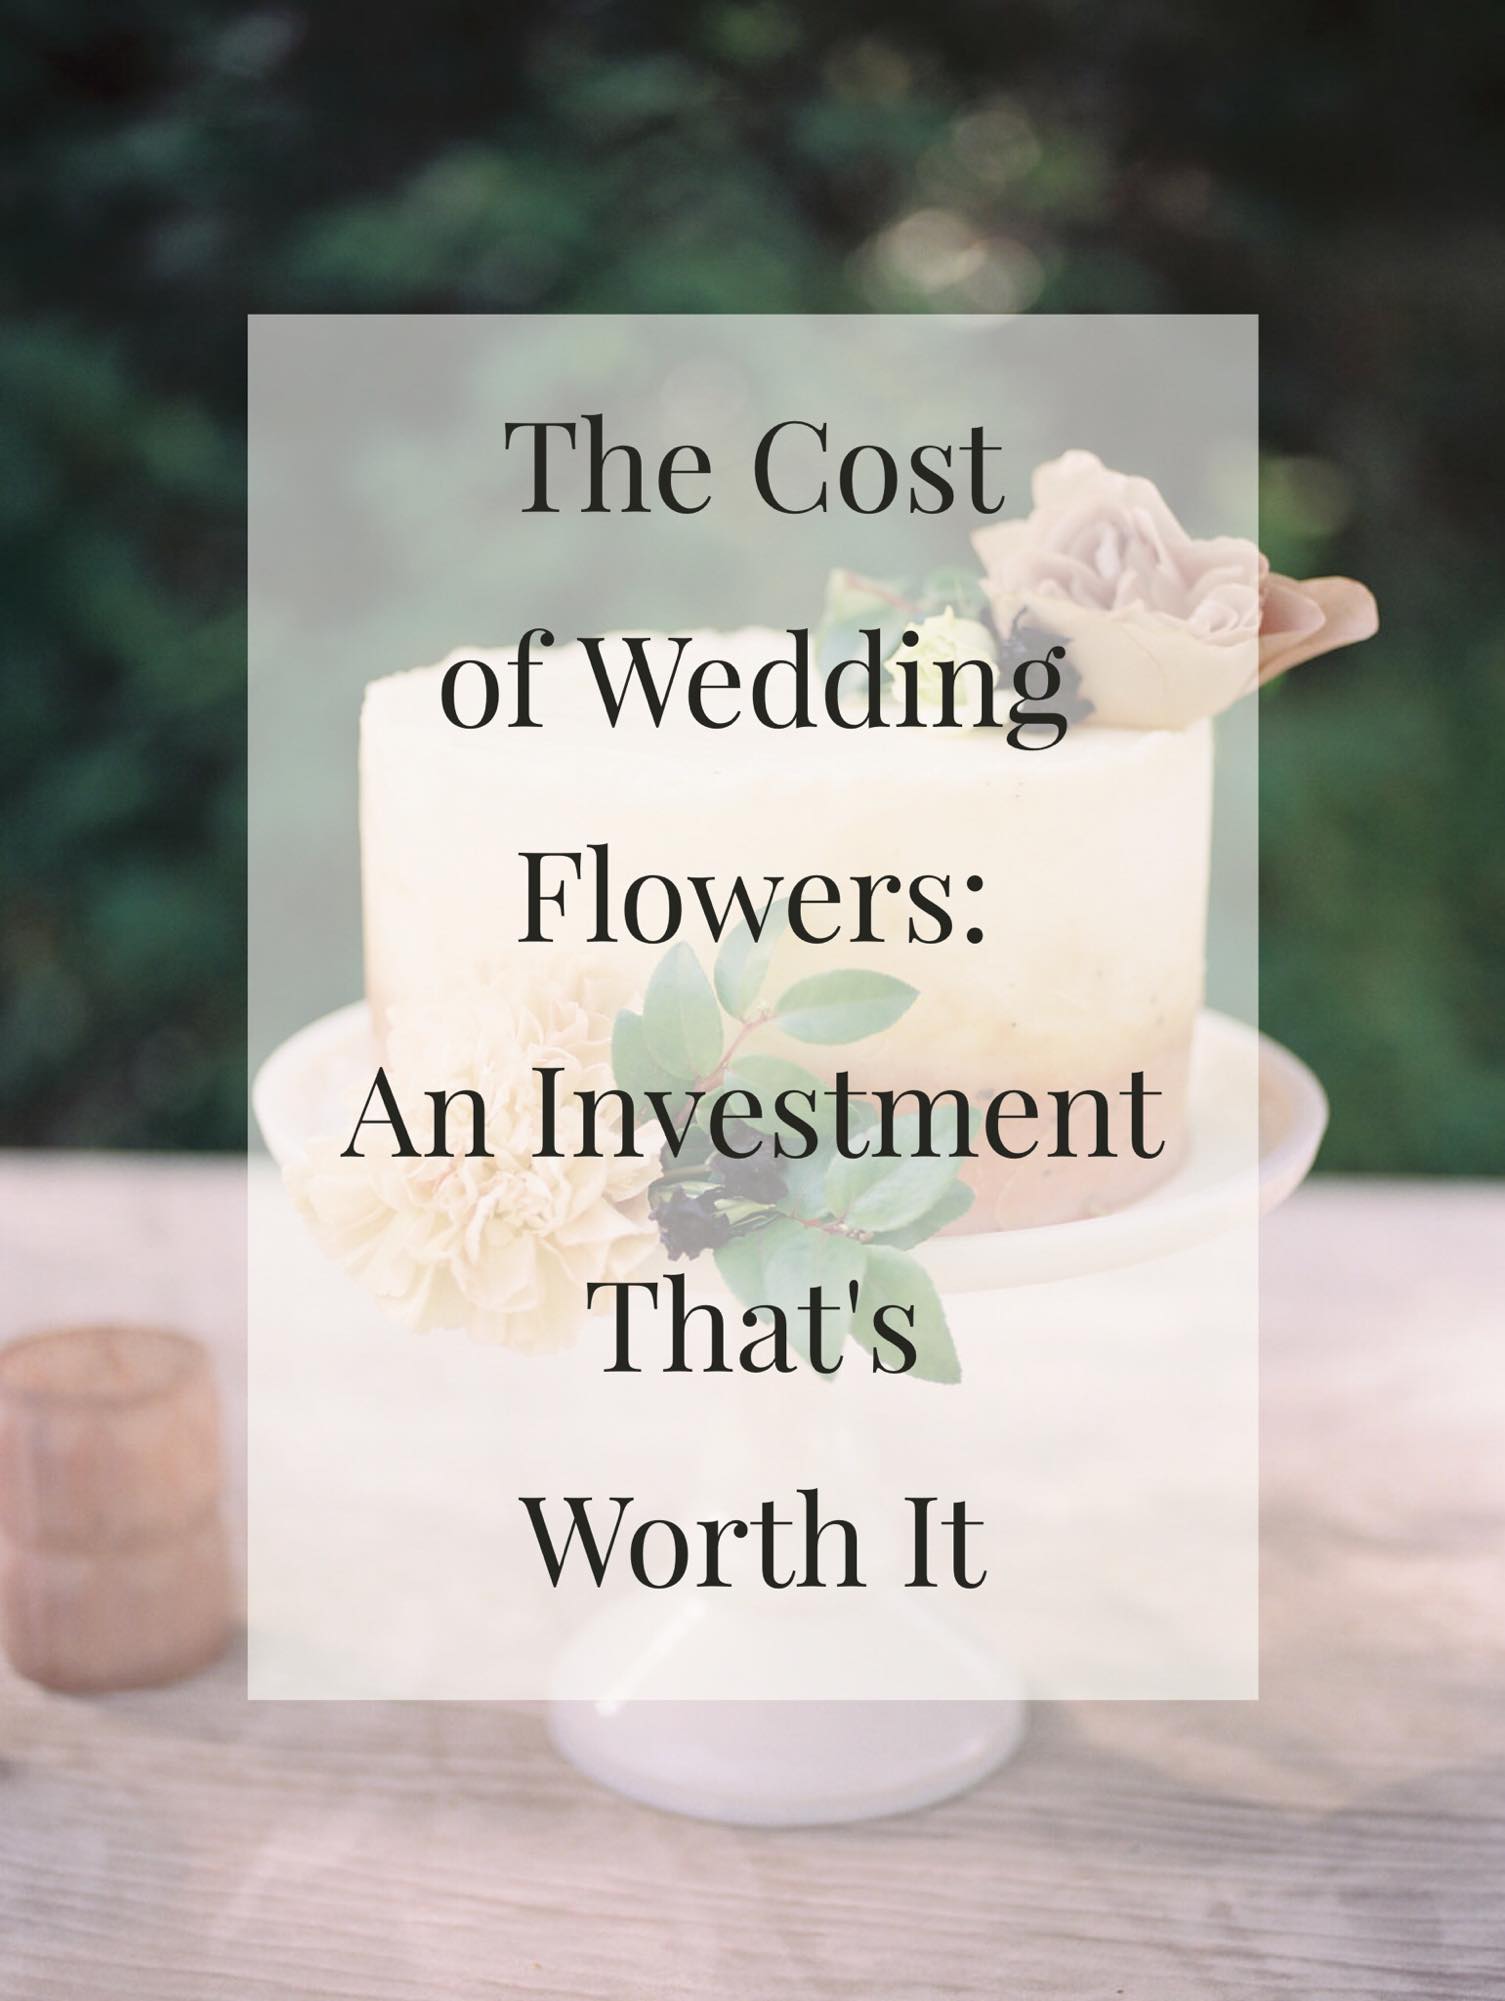 The cost of wedding flowers an investment that's worth it